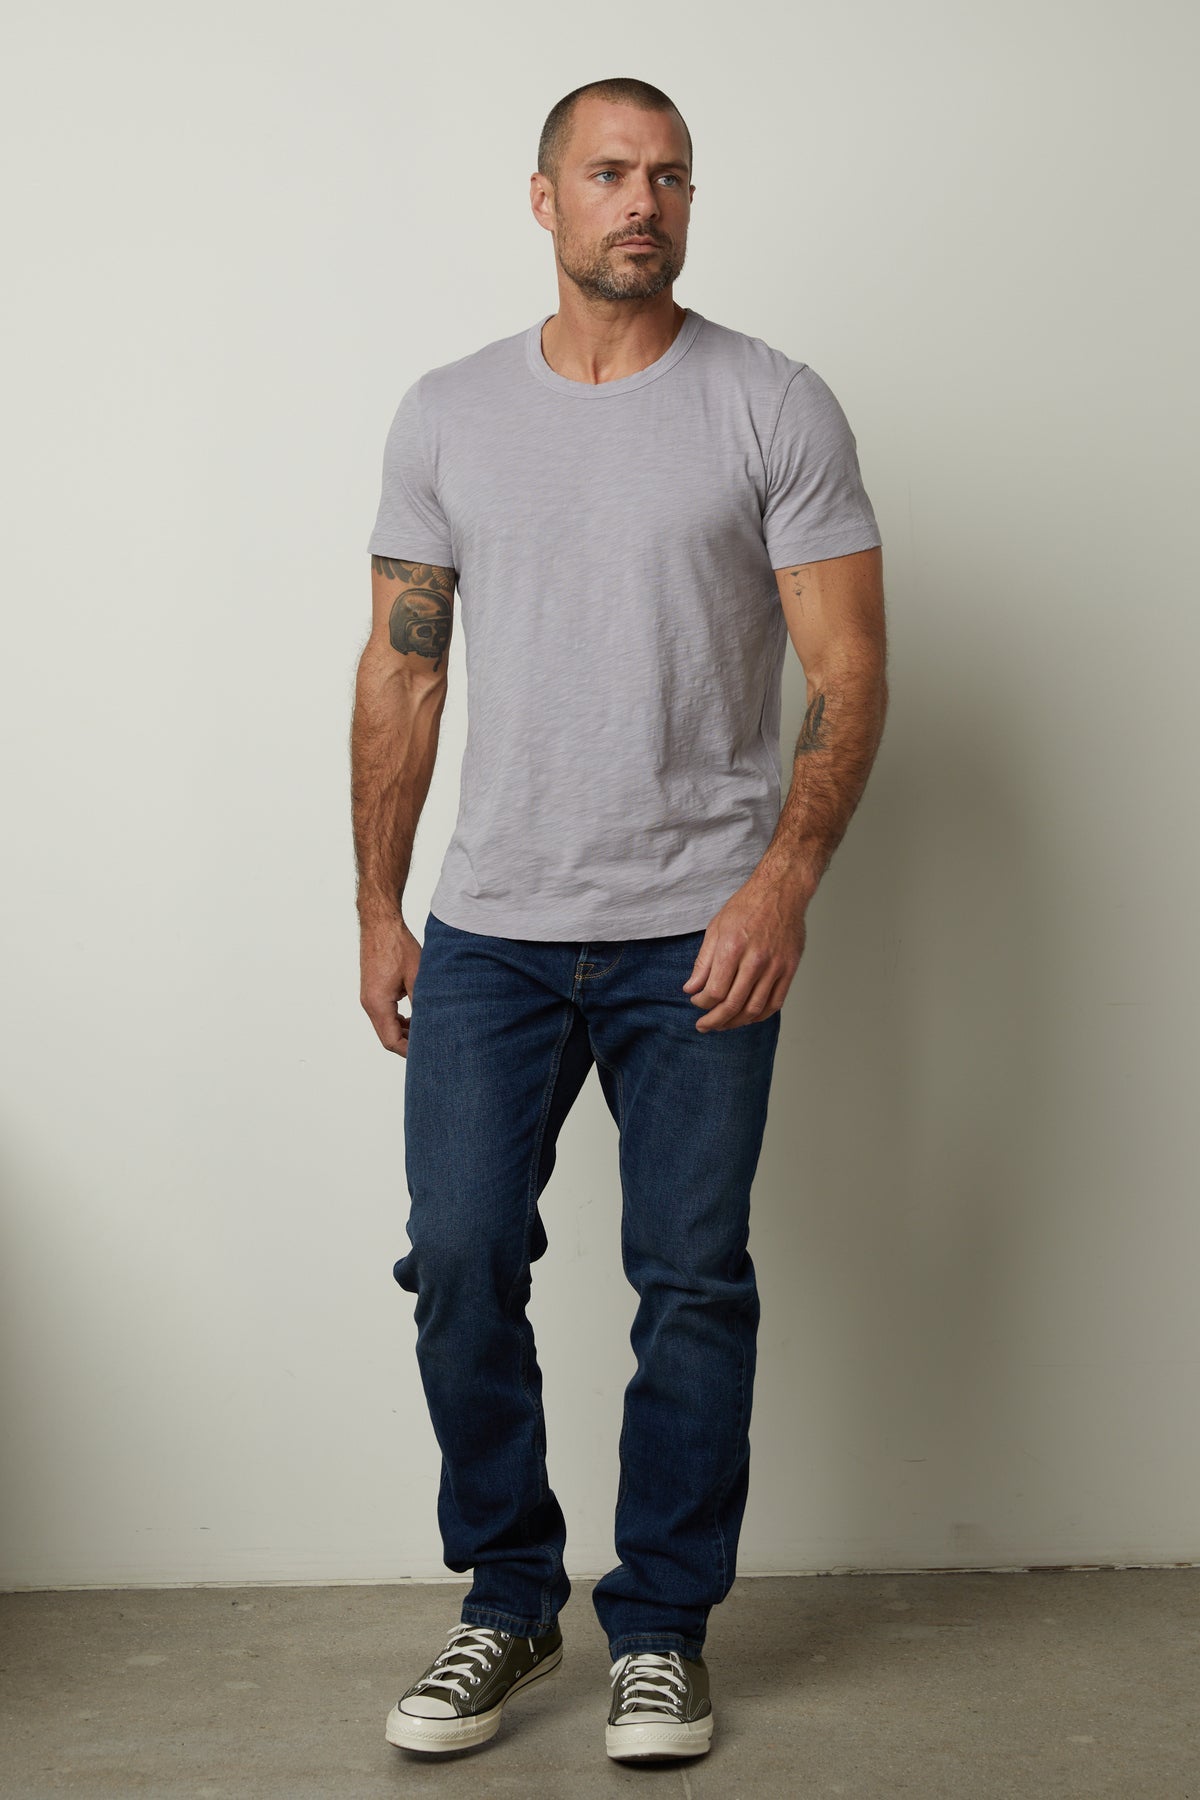 A man standing in a room wearing AMARO CREW NECK SLUB TEE by Velvet by Graham & Spencer jeans and a t - shirt.-35782657278145